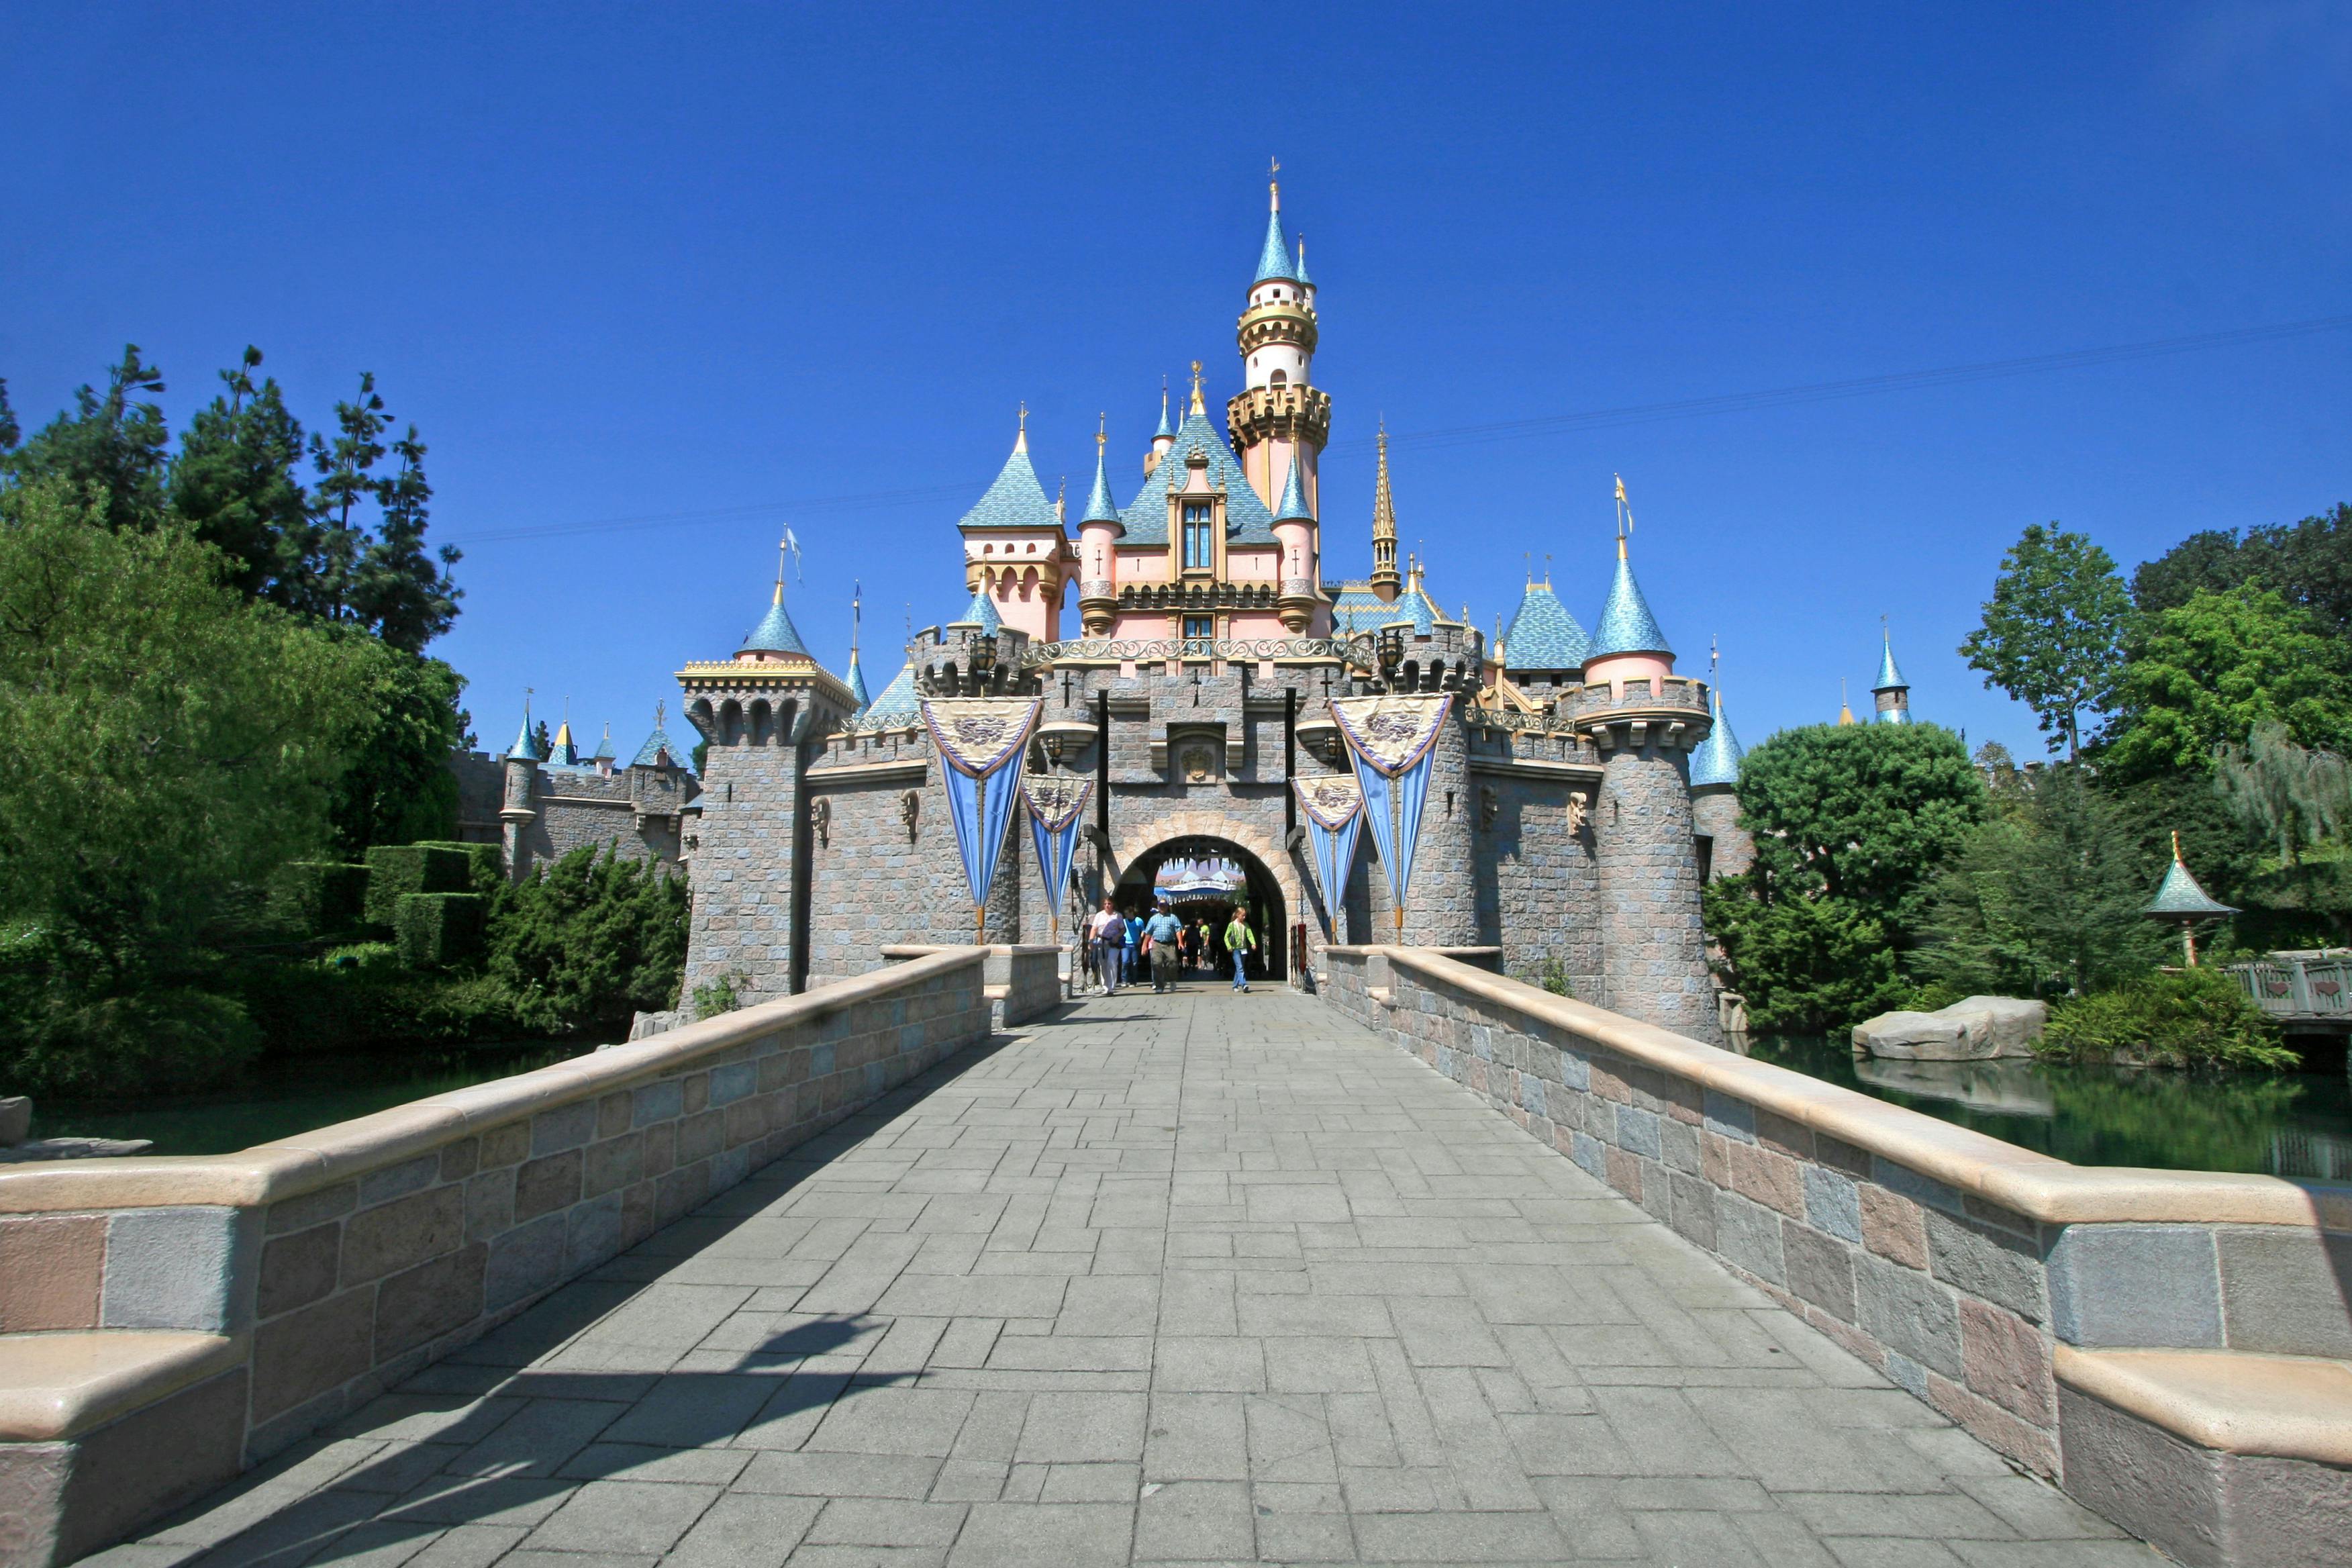 A view over the bridge at the entrance to the Disneyland castle.